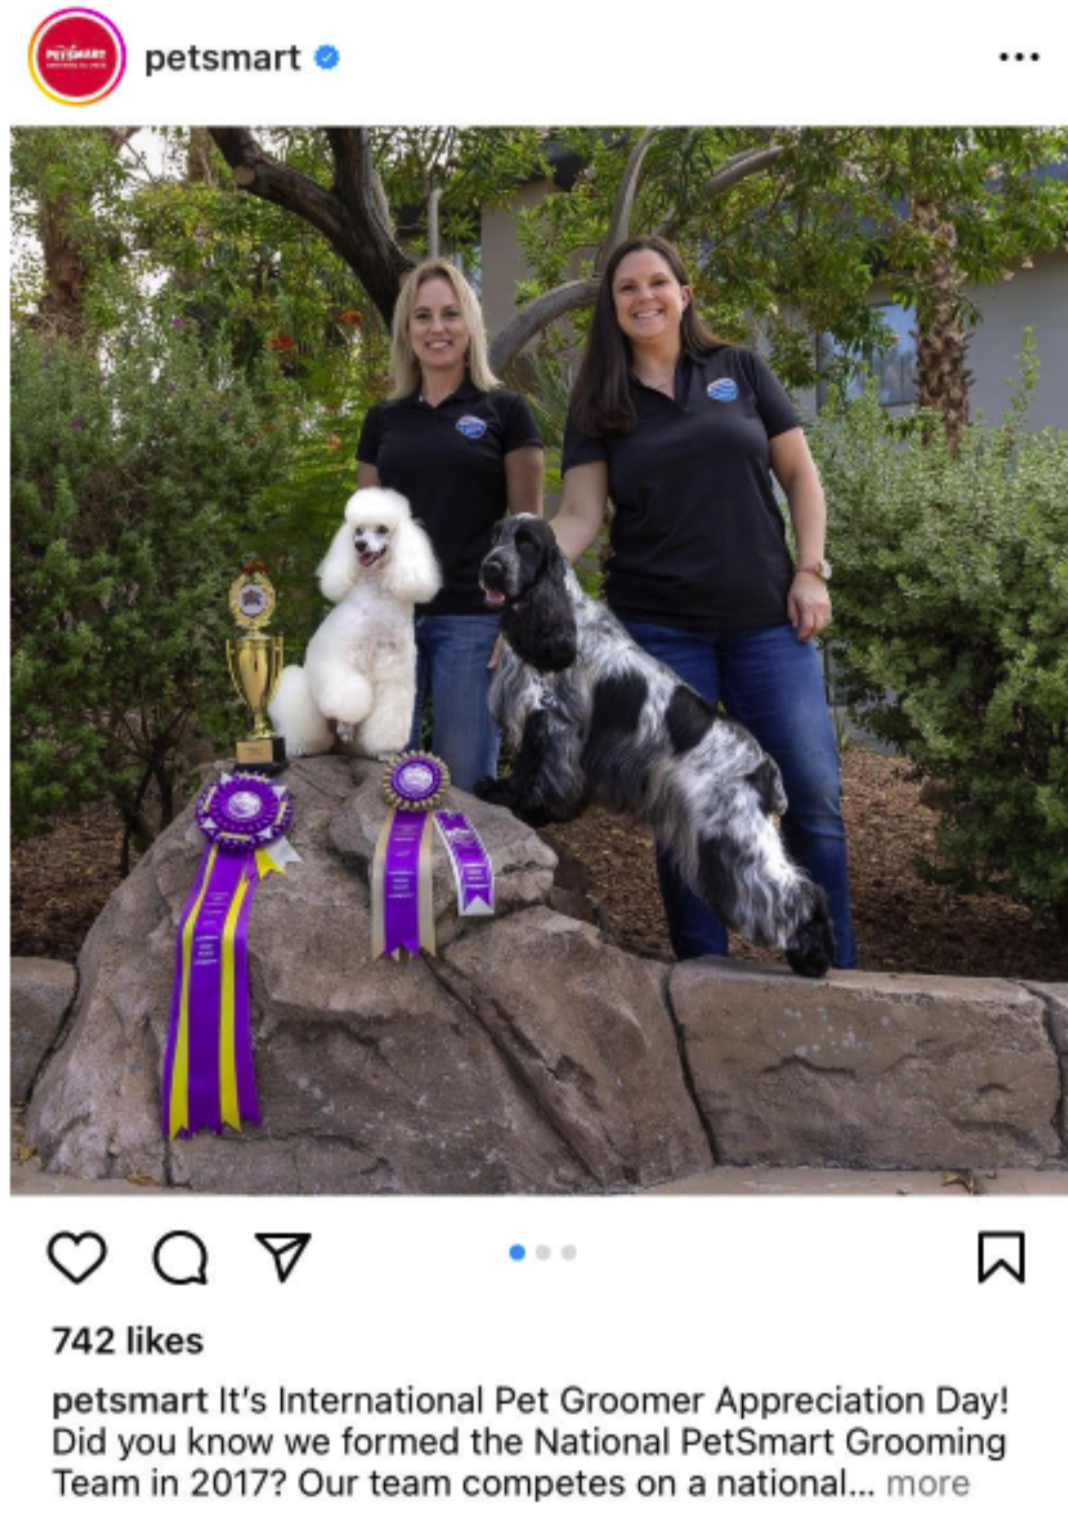 A social media post from Petsmart with two dog trainers with their dogs and ribbons standing on a rock. 